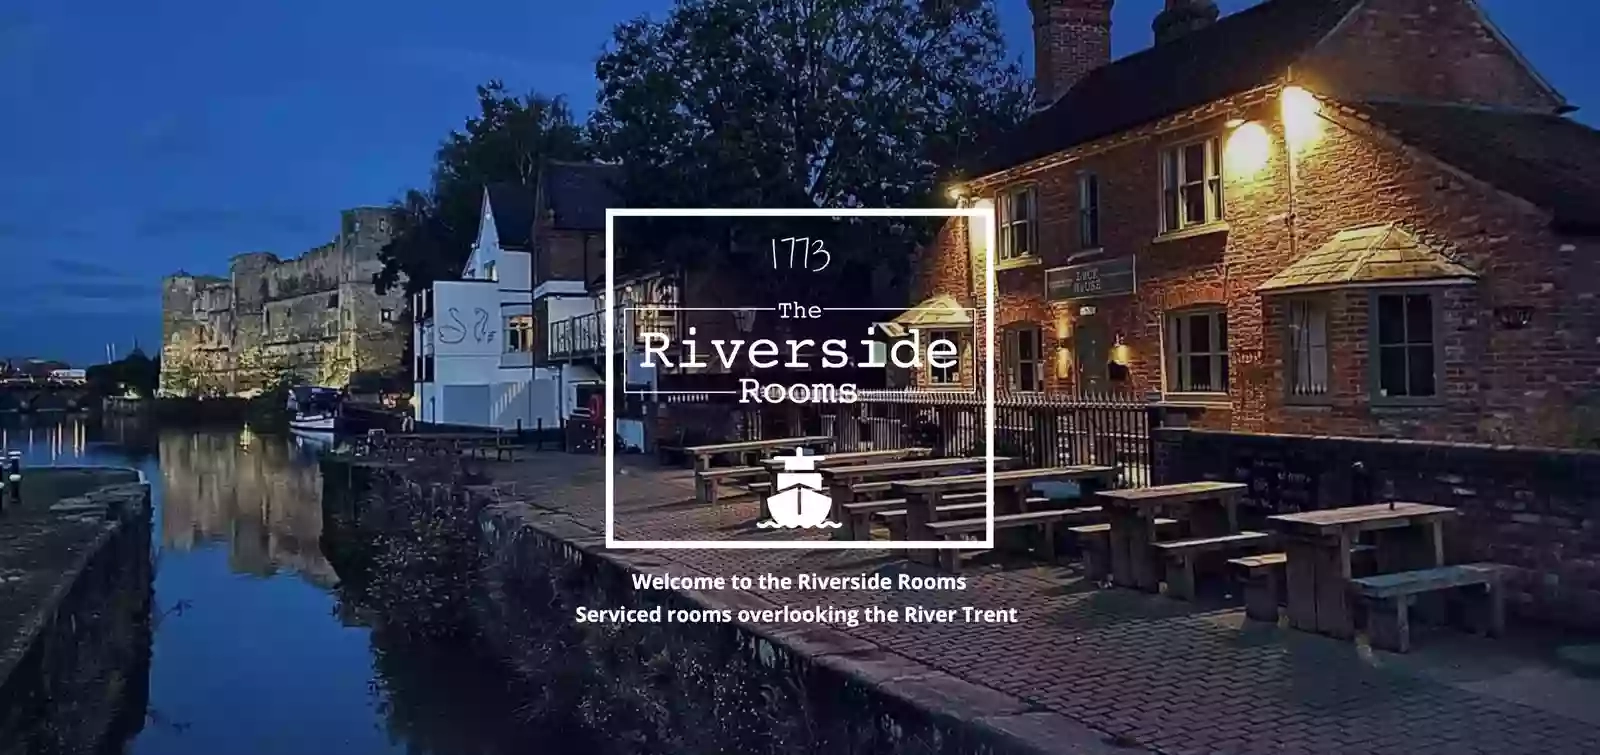 The Riverside Rooms